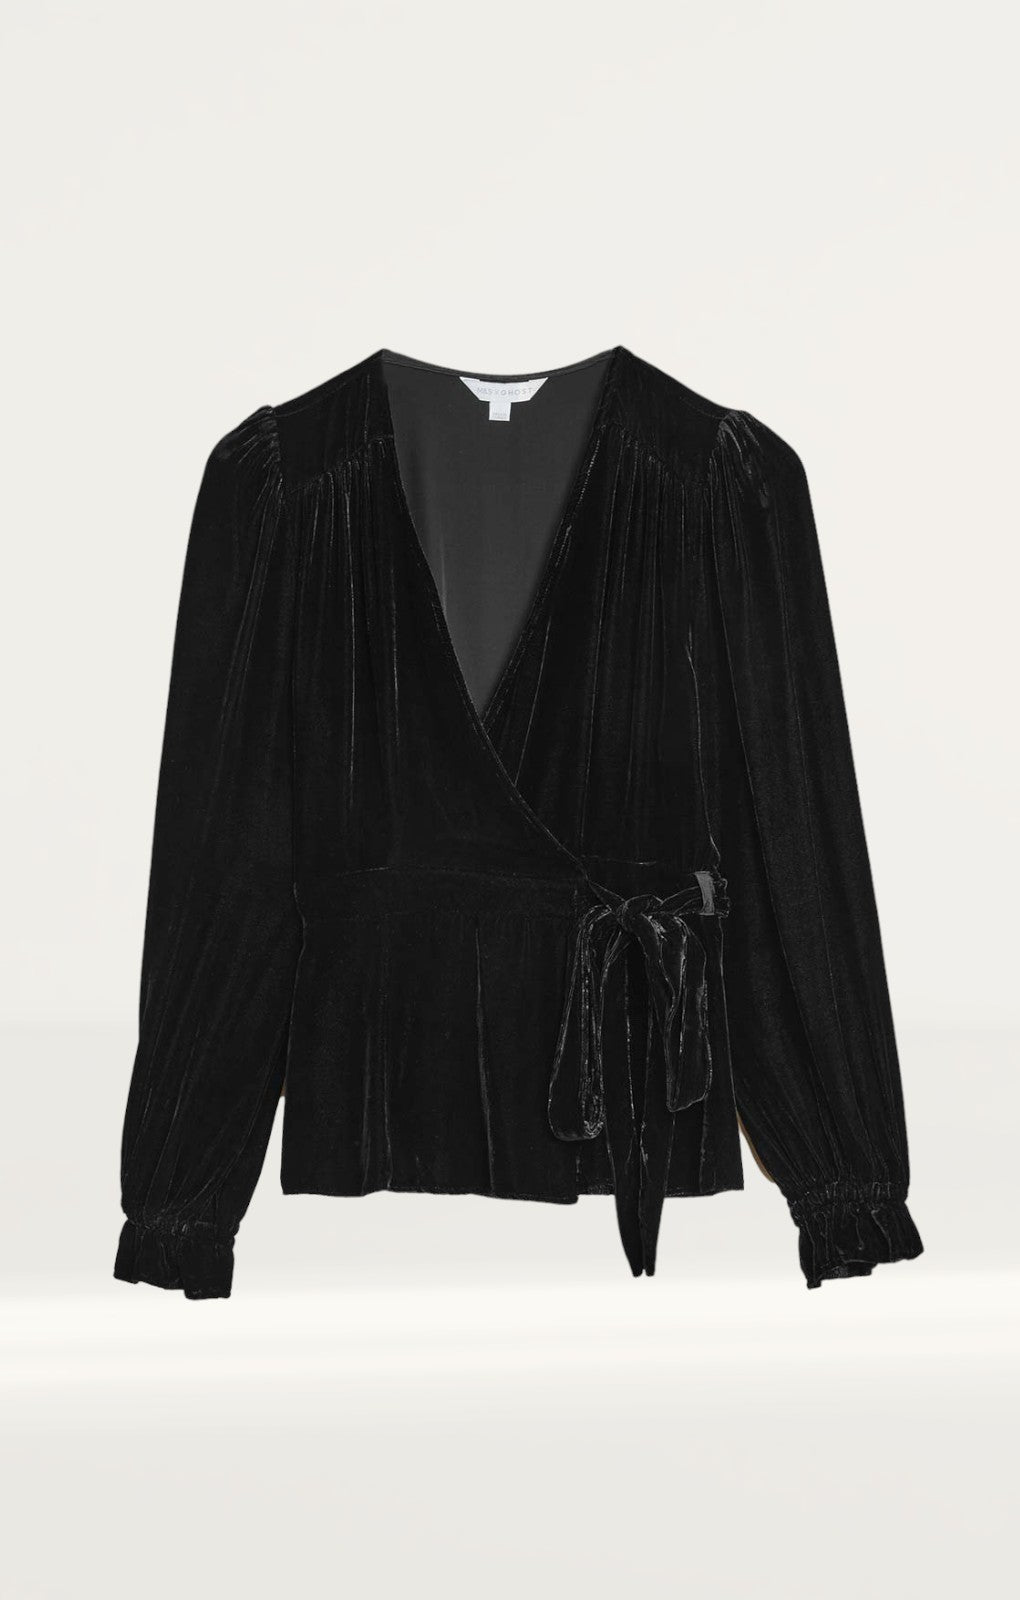 M&S X Ghost Velvet Wrap Top product image